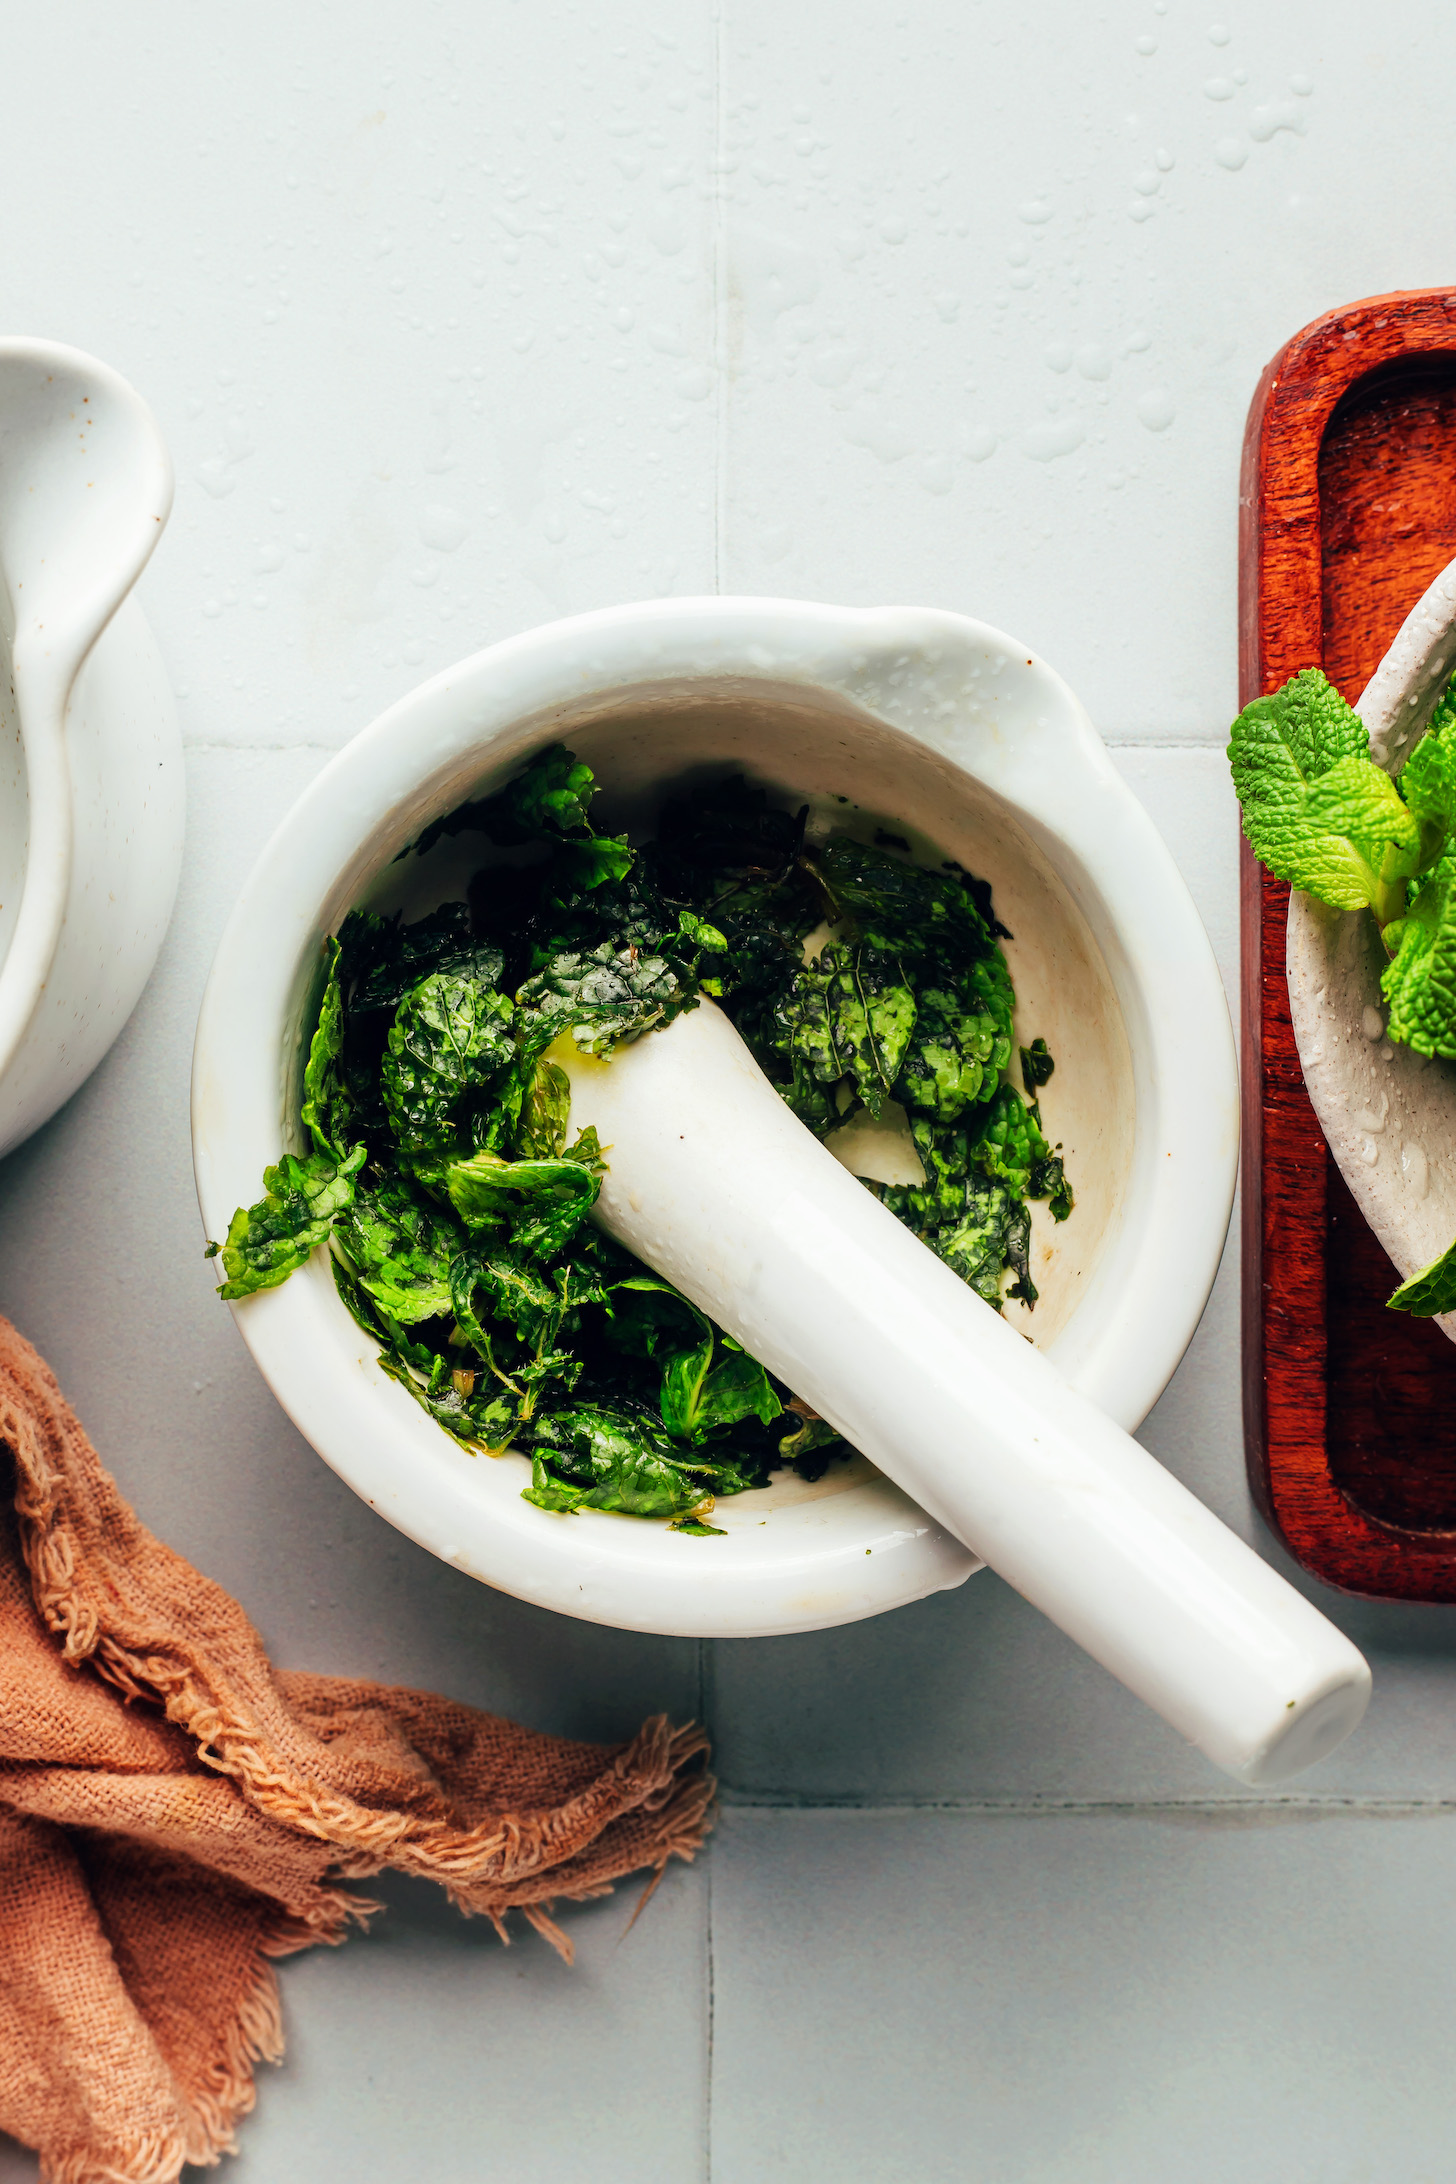 Muddled mint leaves in a mortar and pestle